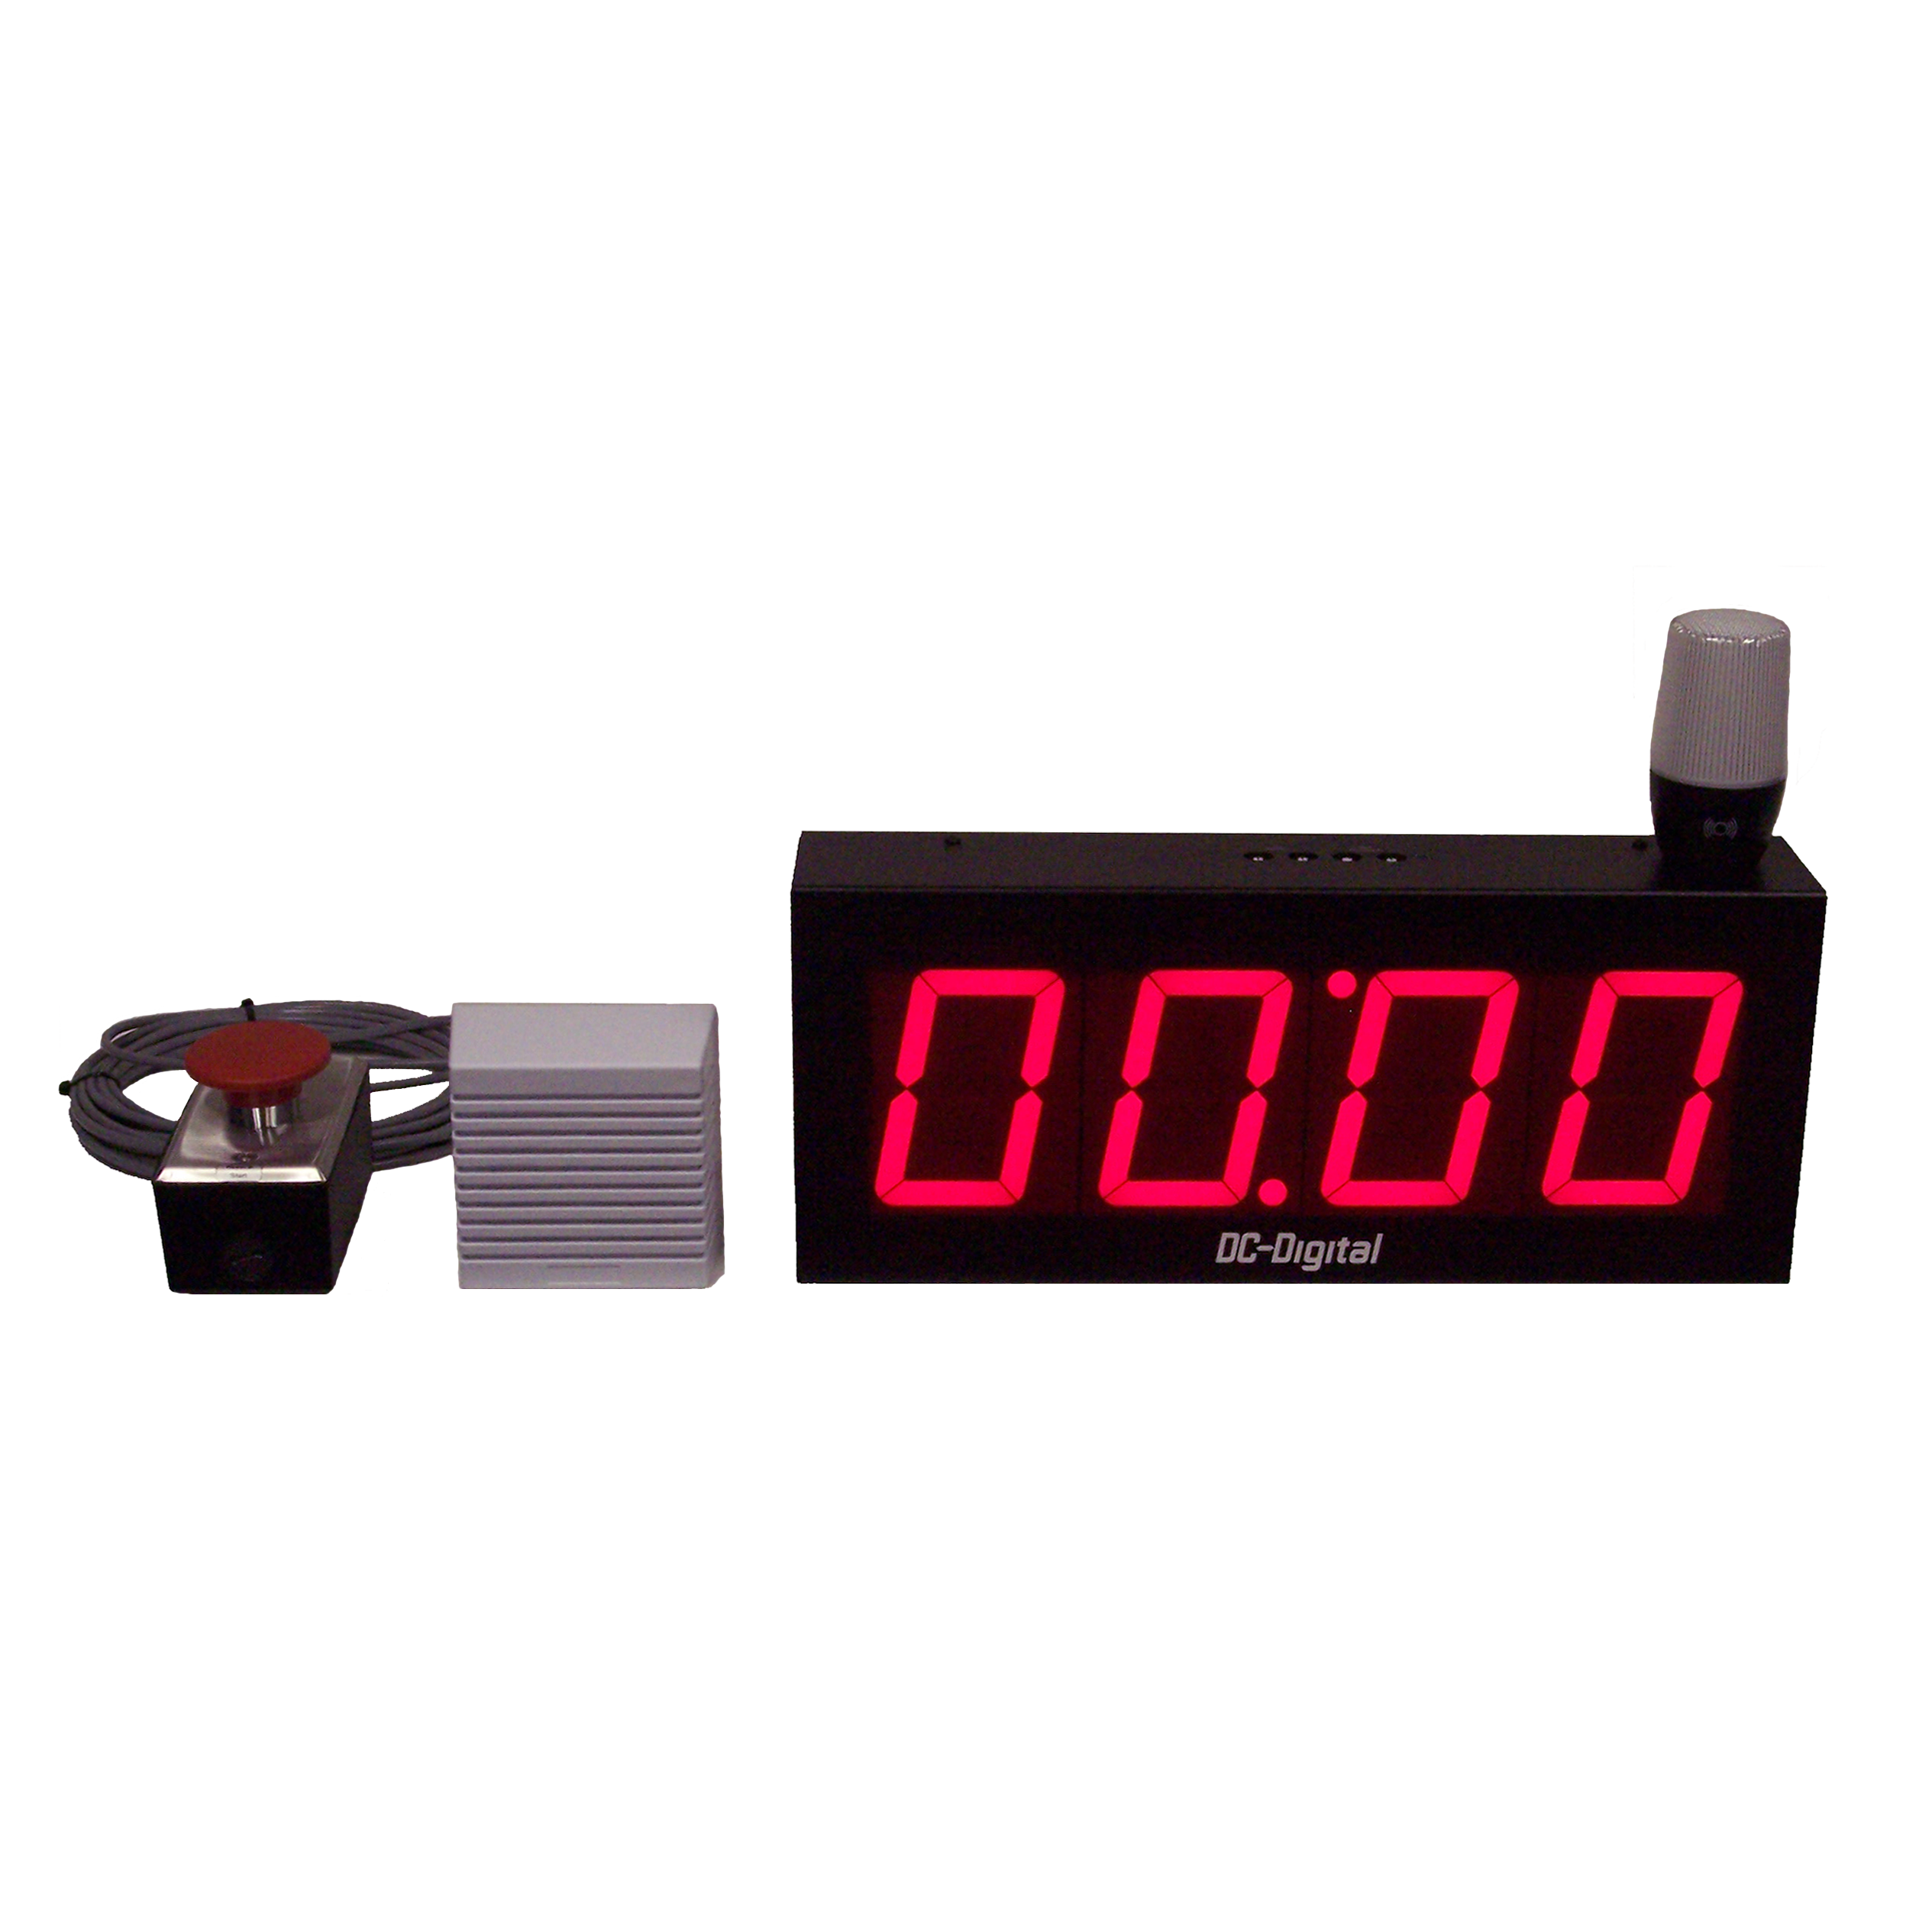 (DC-40T-UP-BCD-ANDON-HORN-WR) BCD Rotary Switch Threshold Set, 4.0 Inch LED Digital, Process Count Up Timer Package, Multi-Color ANDON Light (Flashes RED, Standard), High Output Horn, 60mm RED Reset and Start Palm Switch (J-Box, Stainless Cover, 25ft. Cabling) and Power Supply